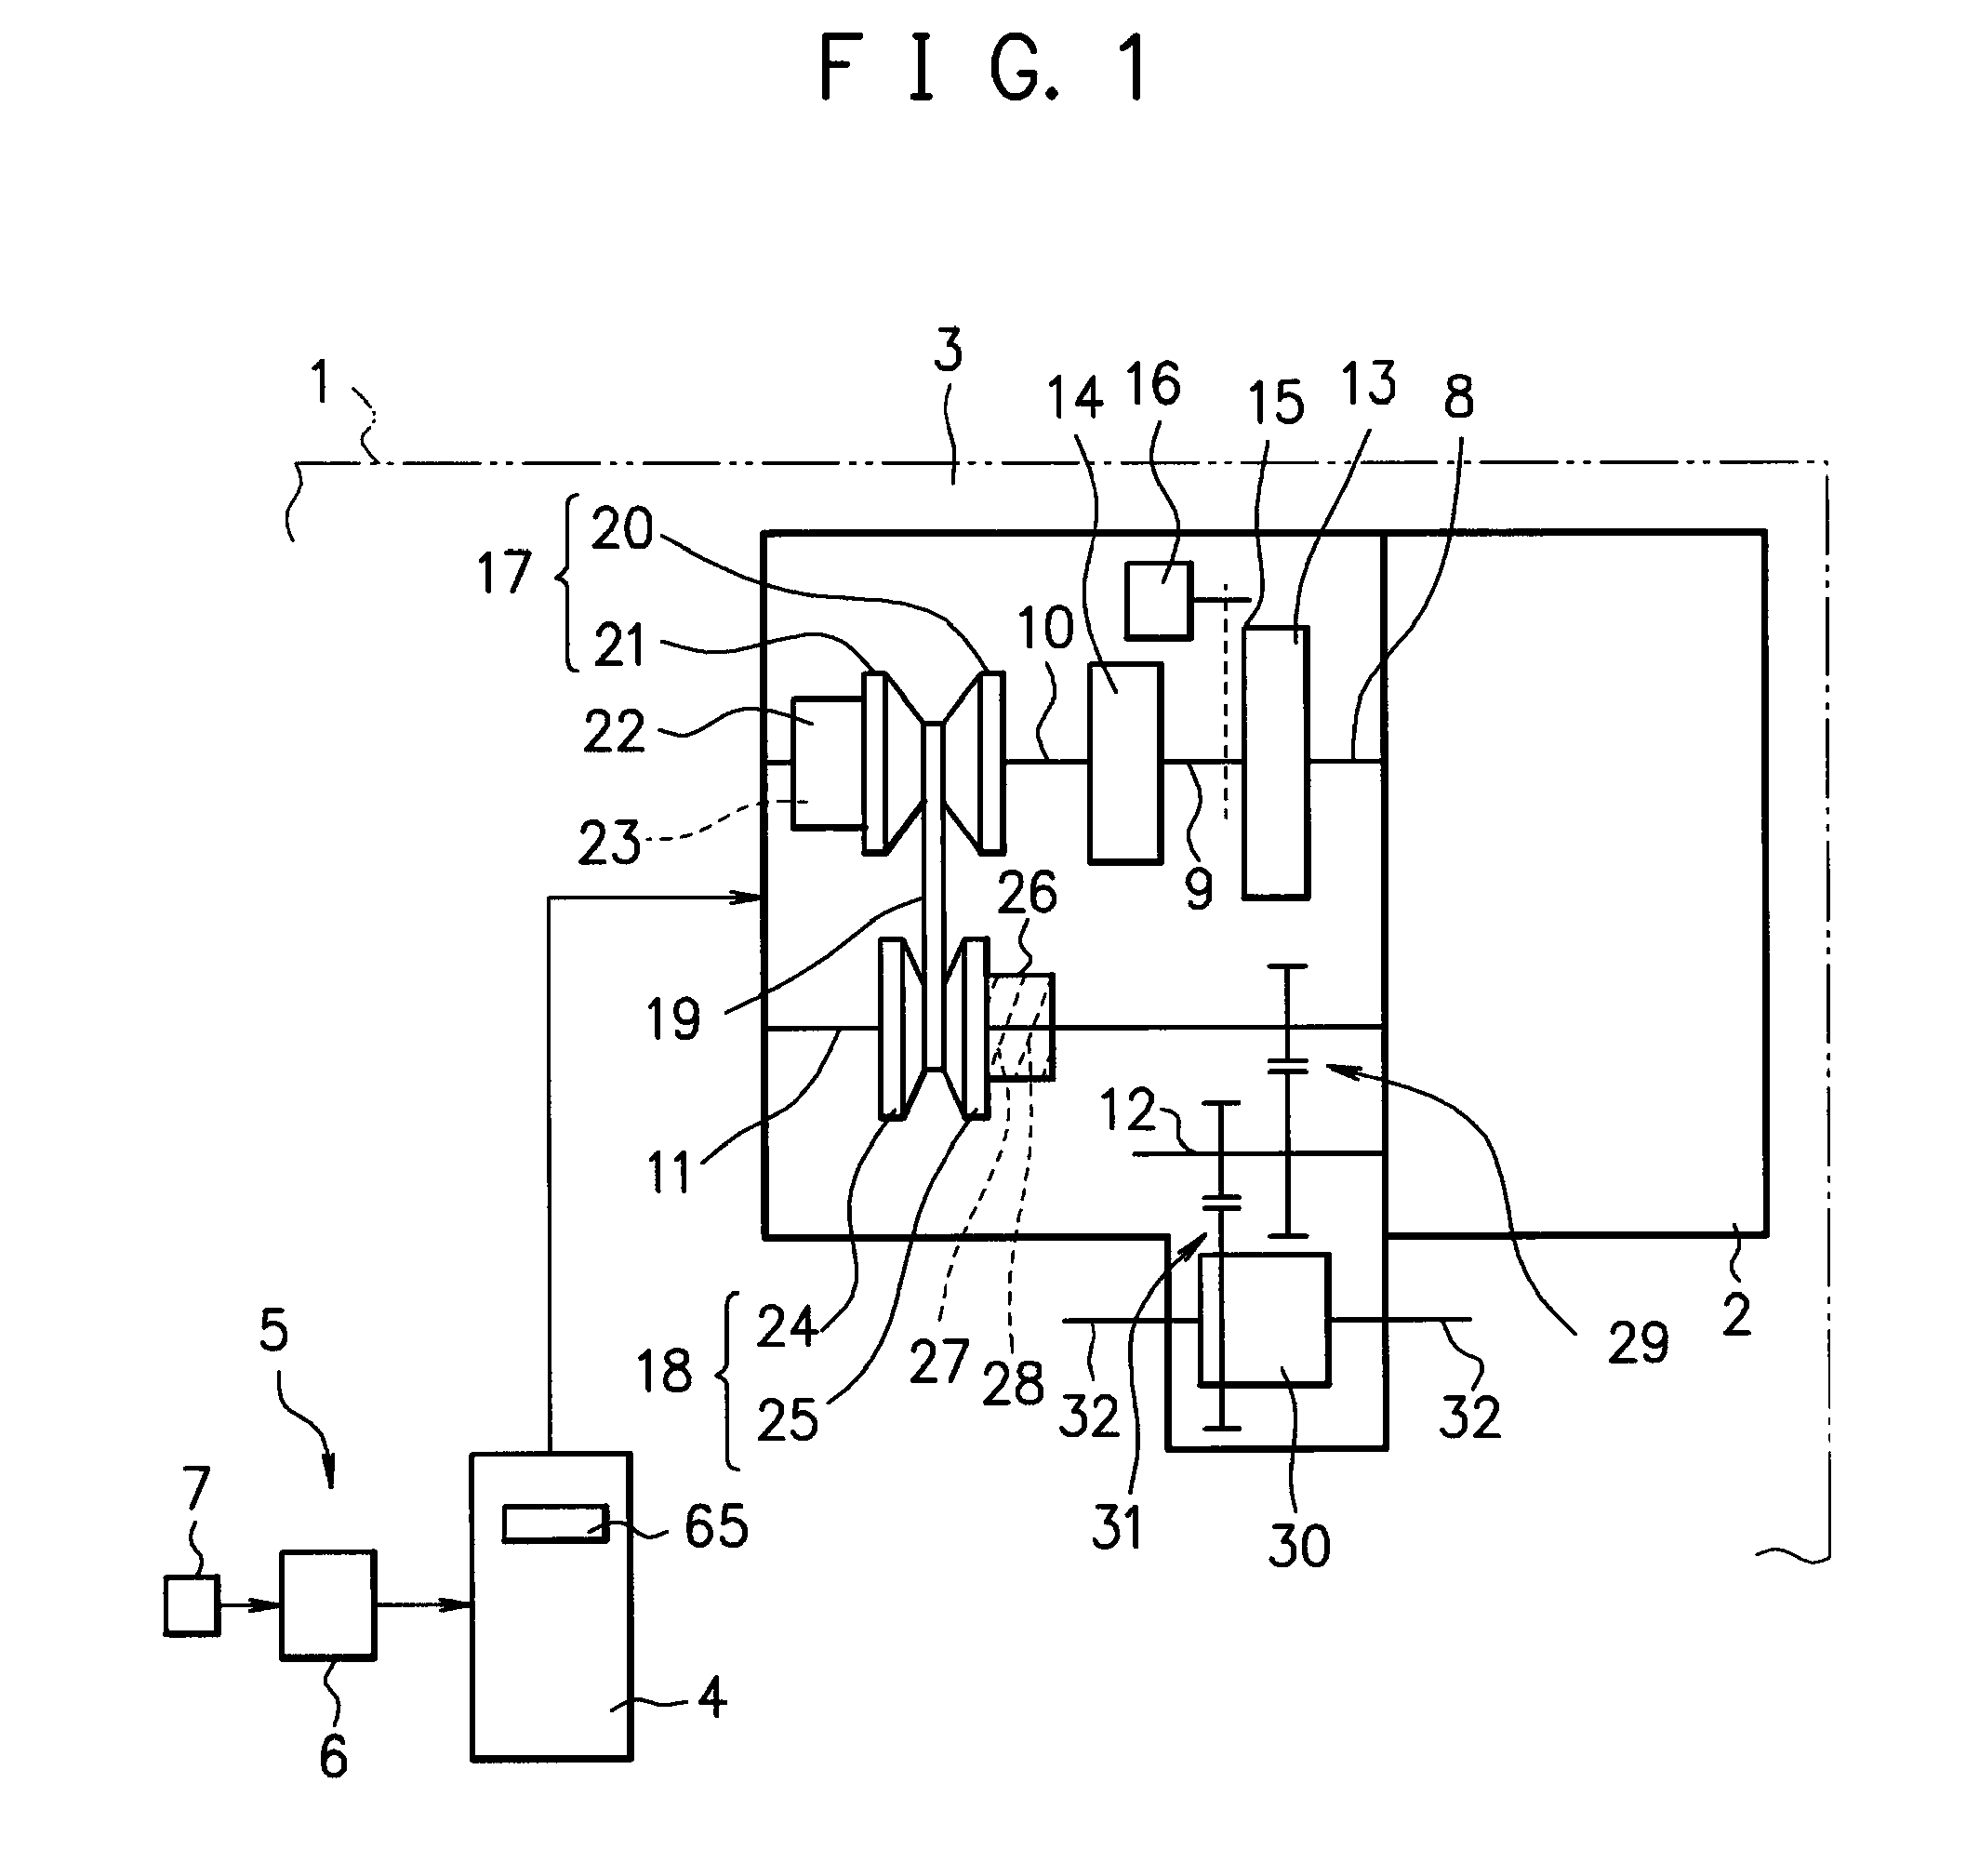 Shift control apparatus of automatic transmission